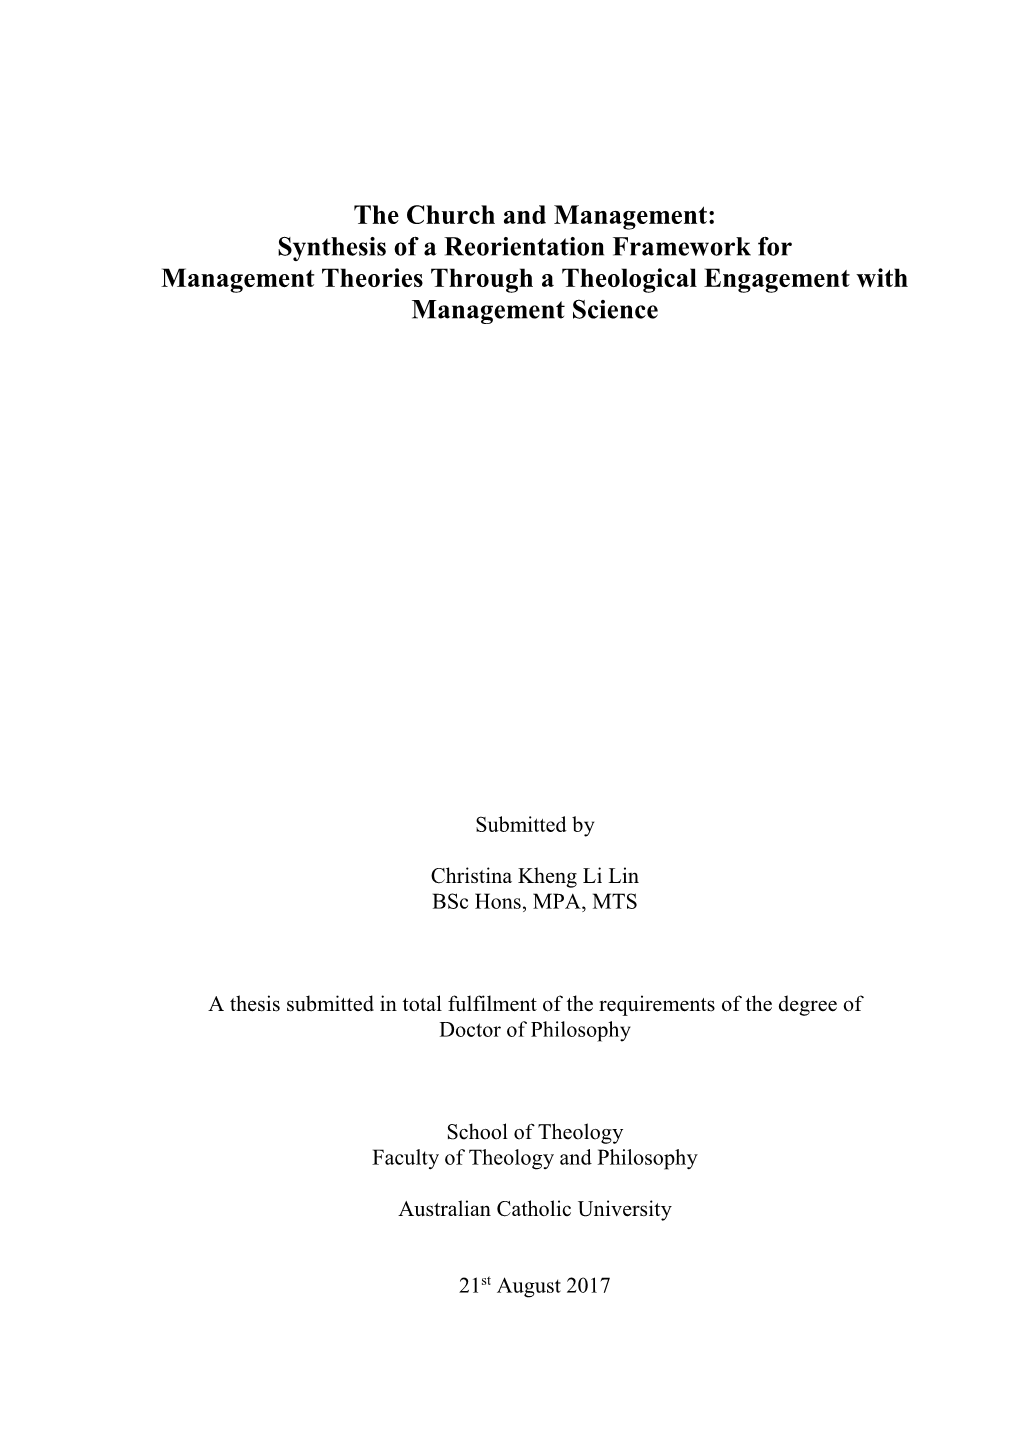 Synthesis of a Reorientation Framework for Management Theories Through a Theological Engagement with Management Science